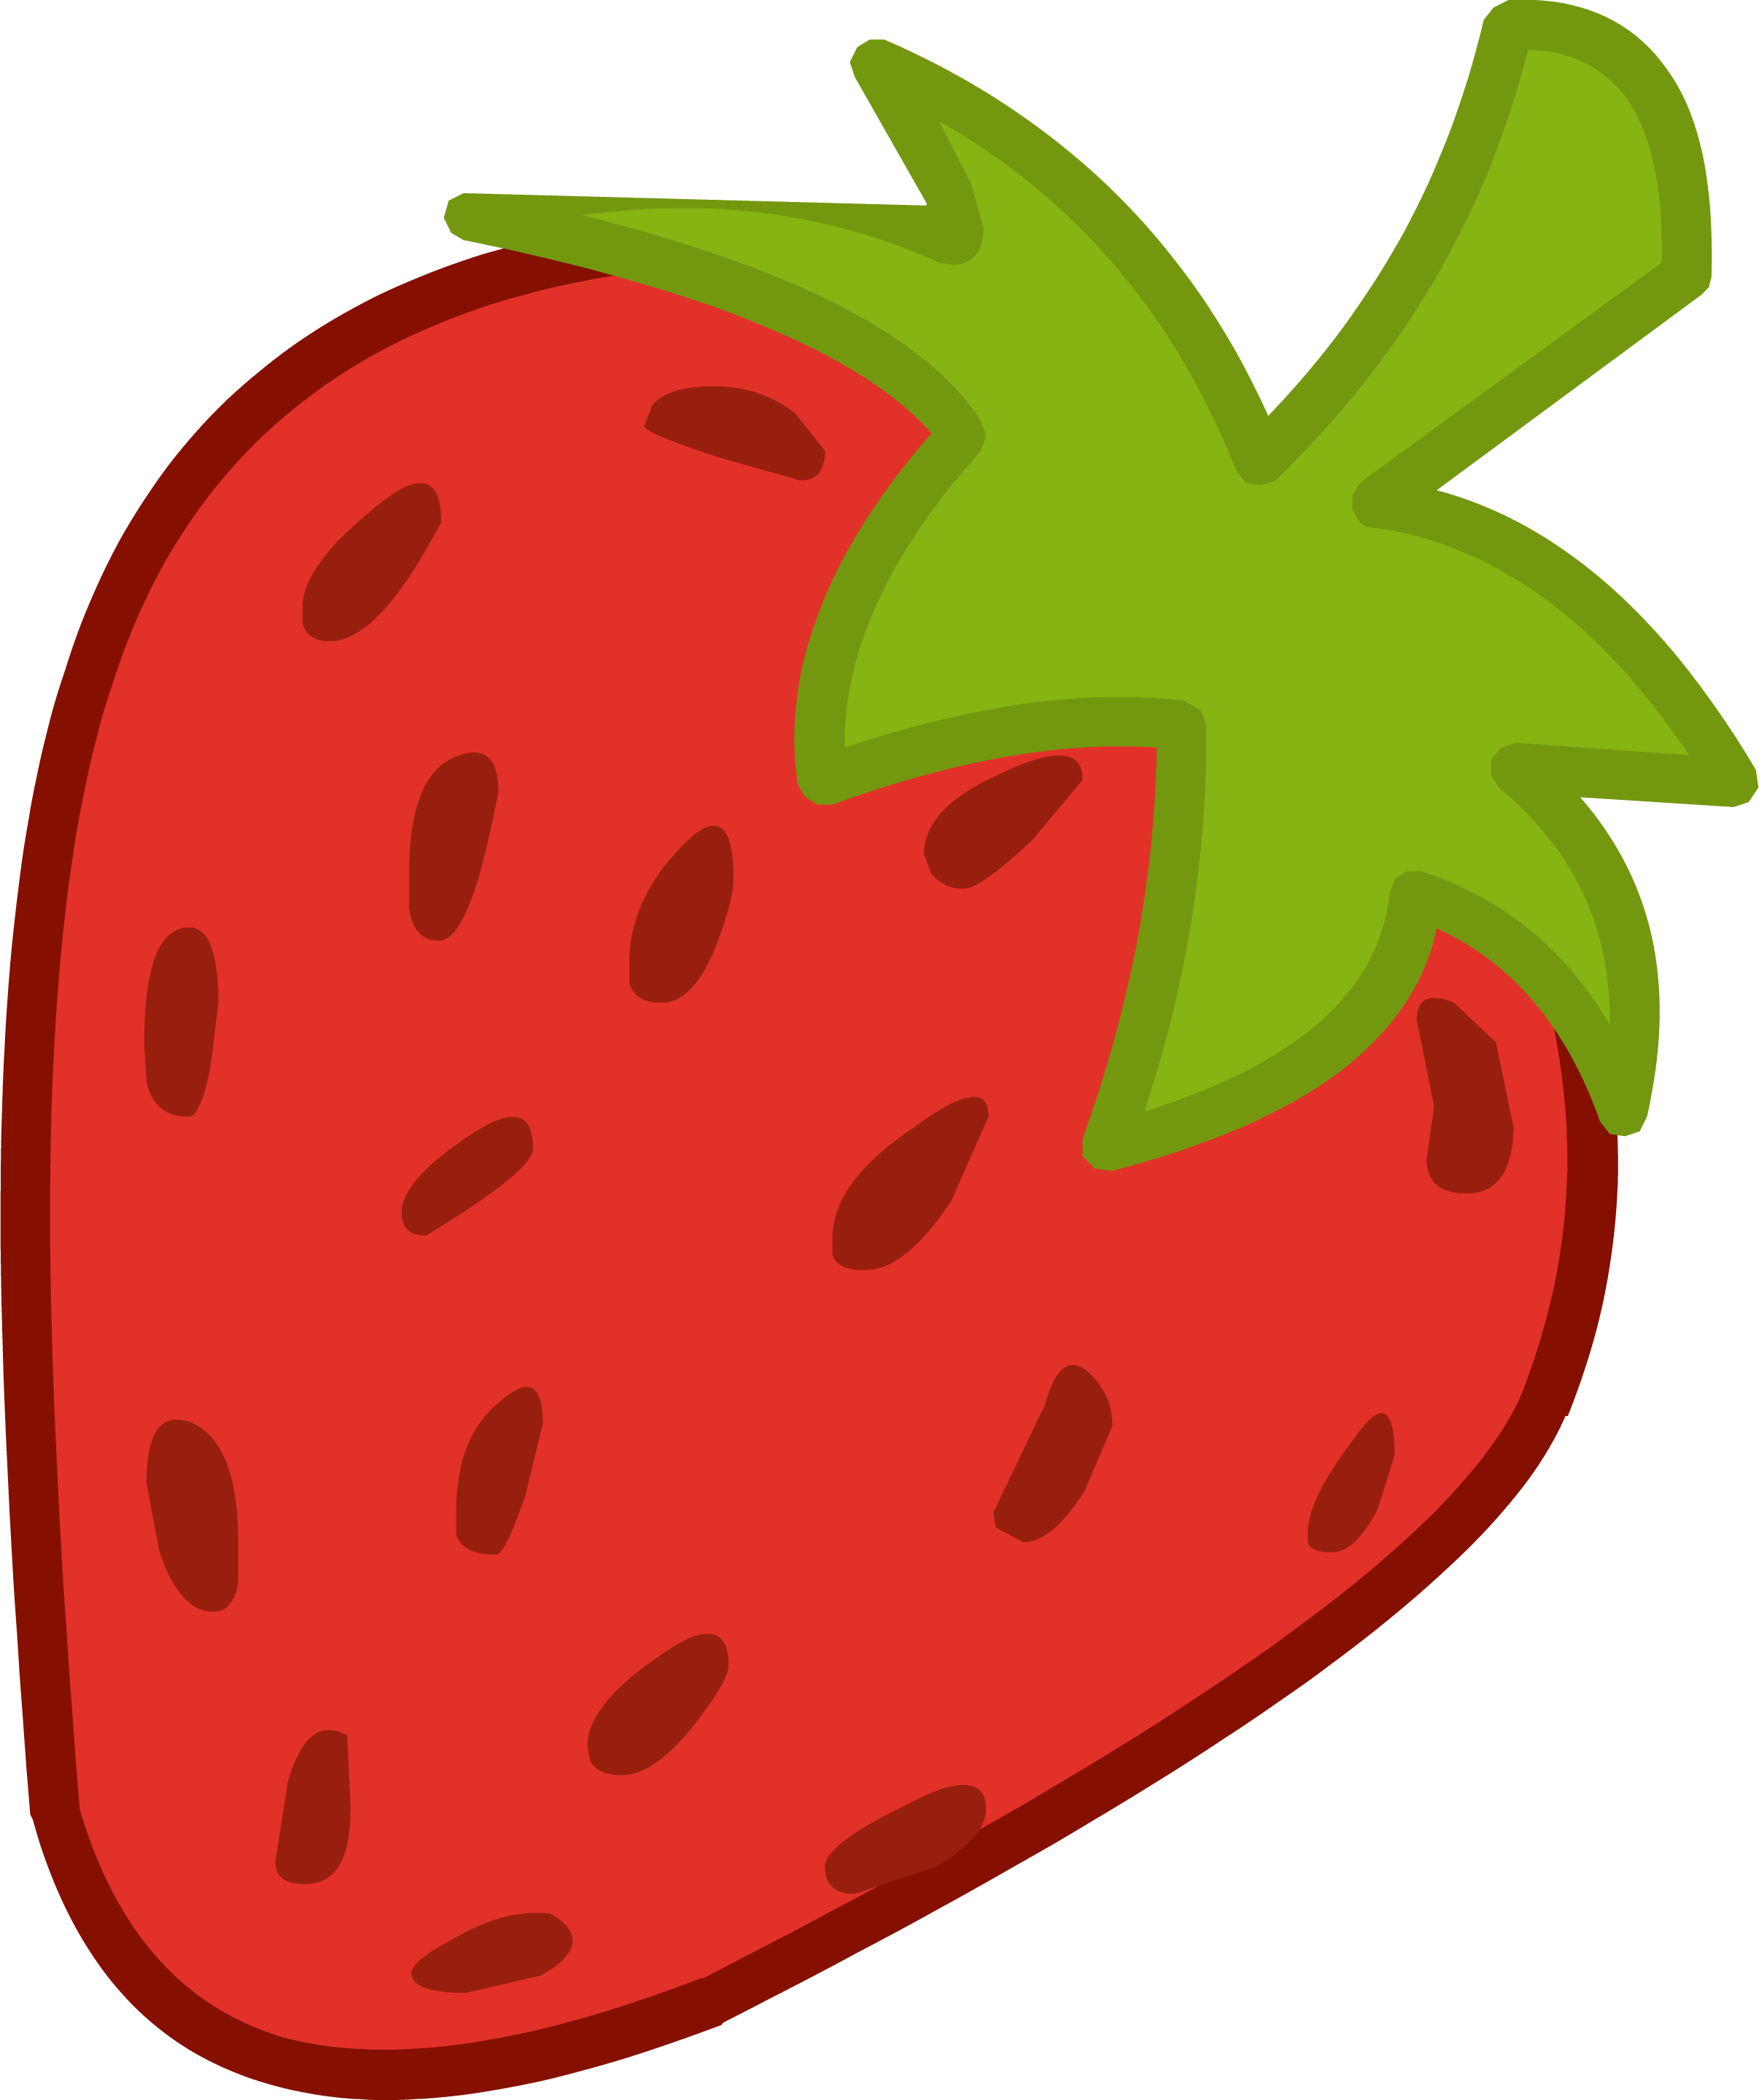 clipart for strawberry - photo #19